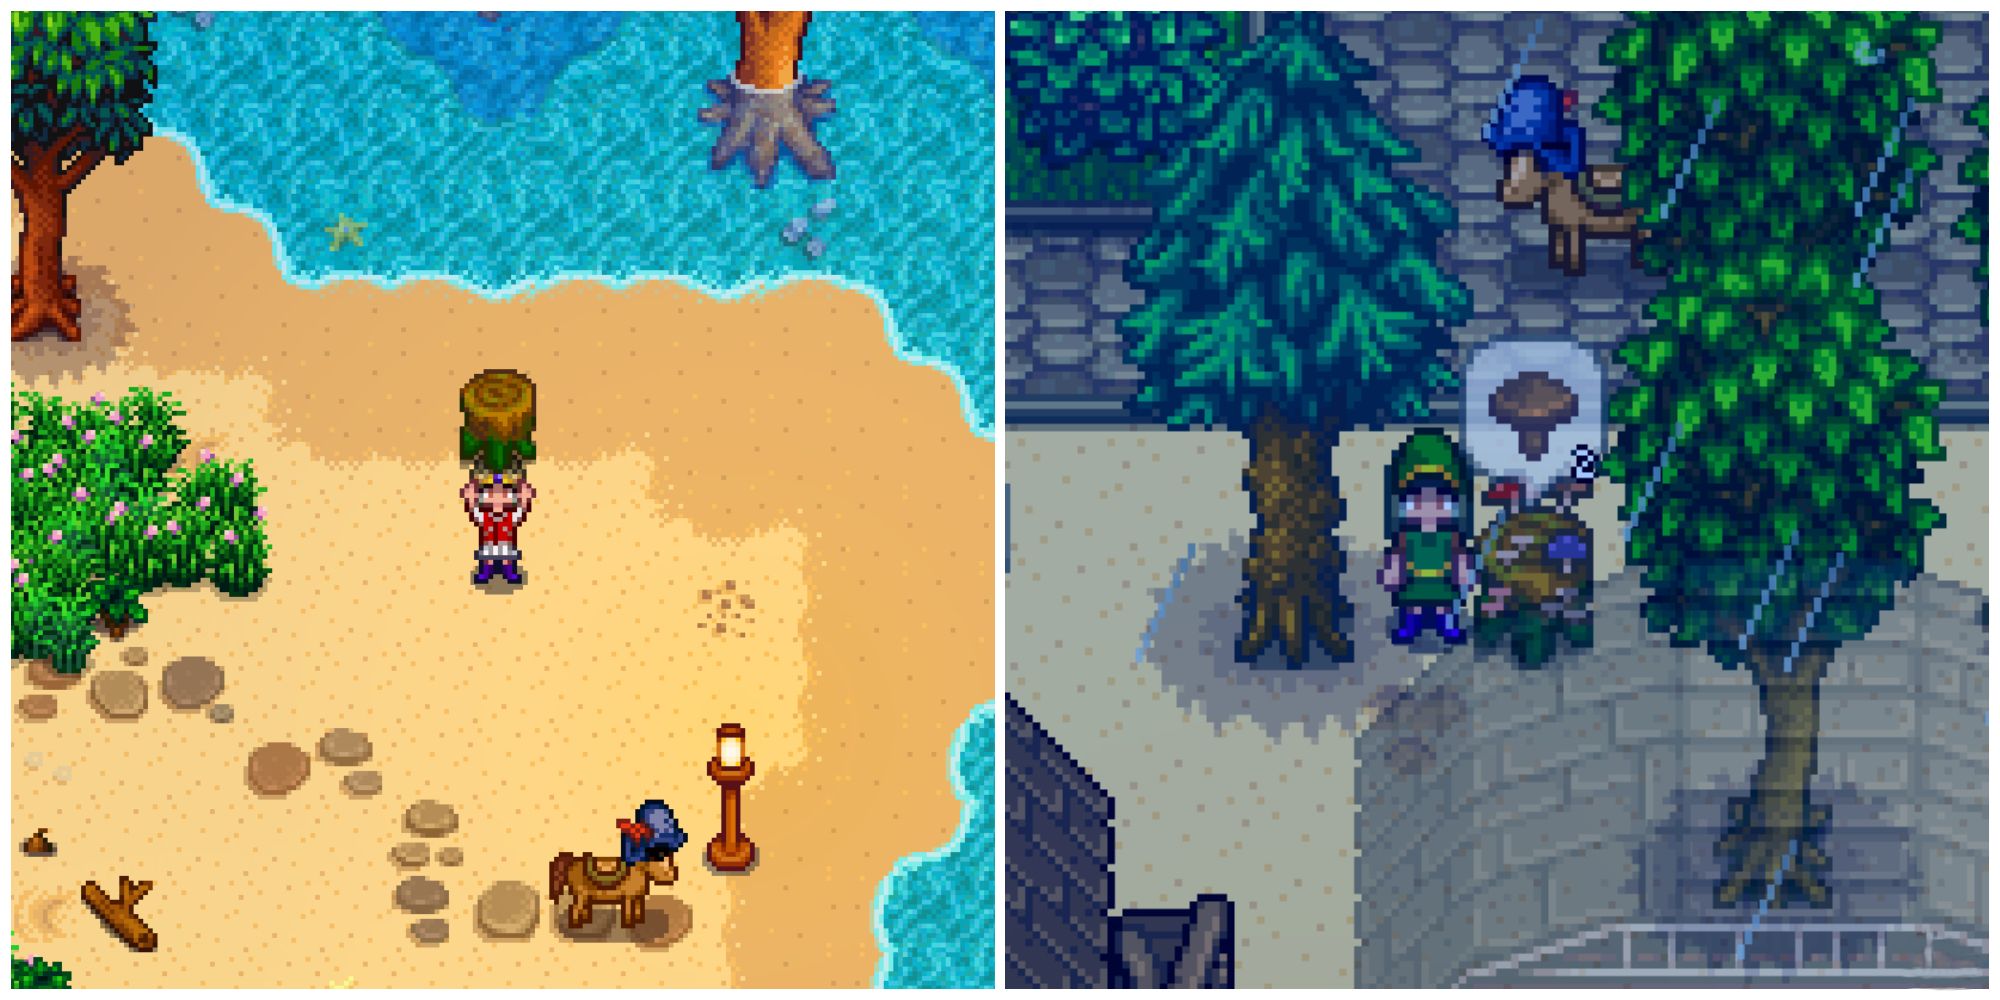 Split image of a character holding a mushroom log and a character in front of a mushroom log that produced 2 common mushrooms in Stardew Valley